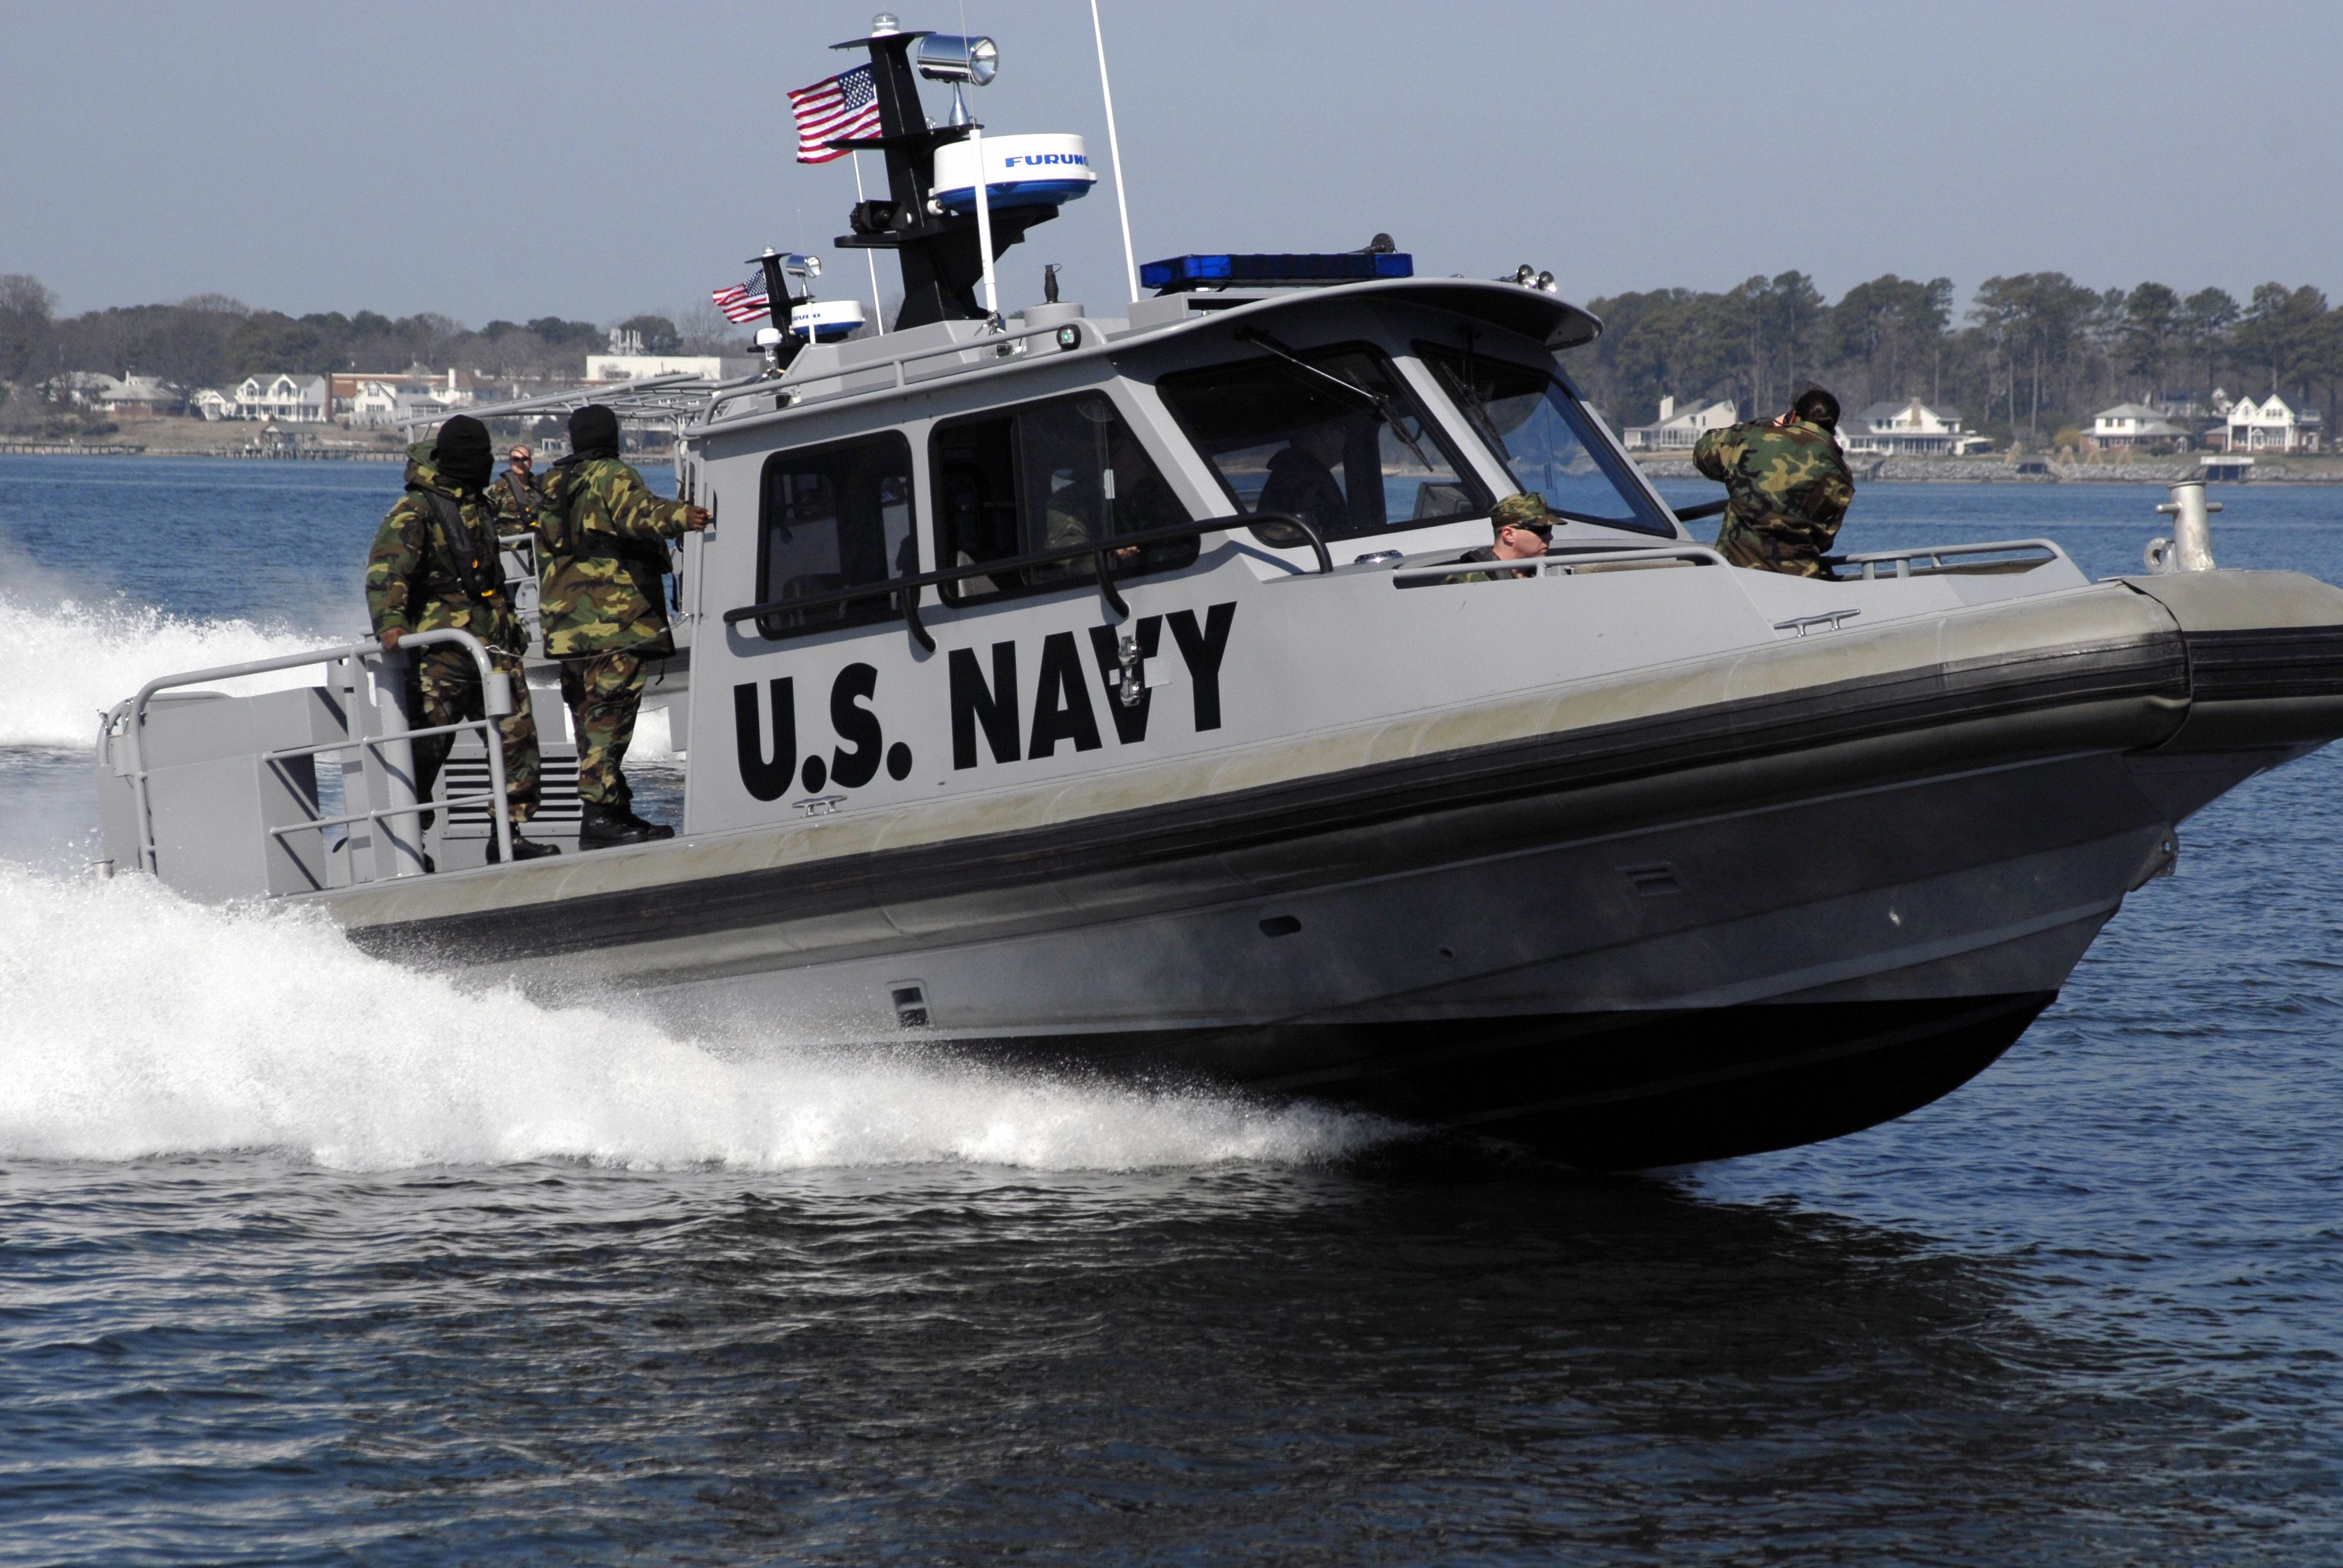 navy security boat - Google Search | book tactical gear | Pinterest ...